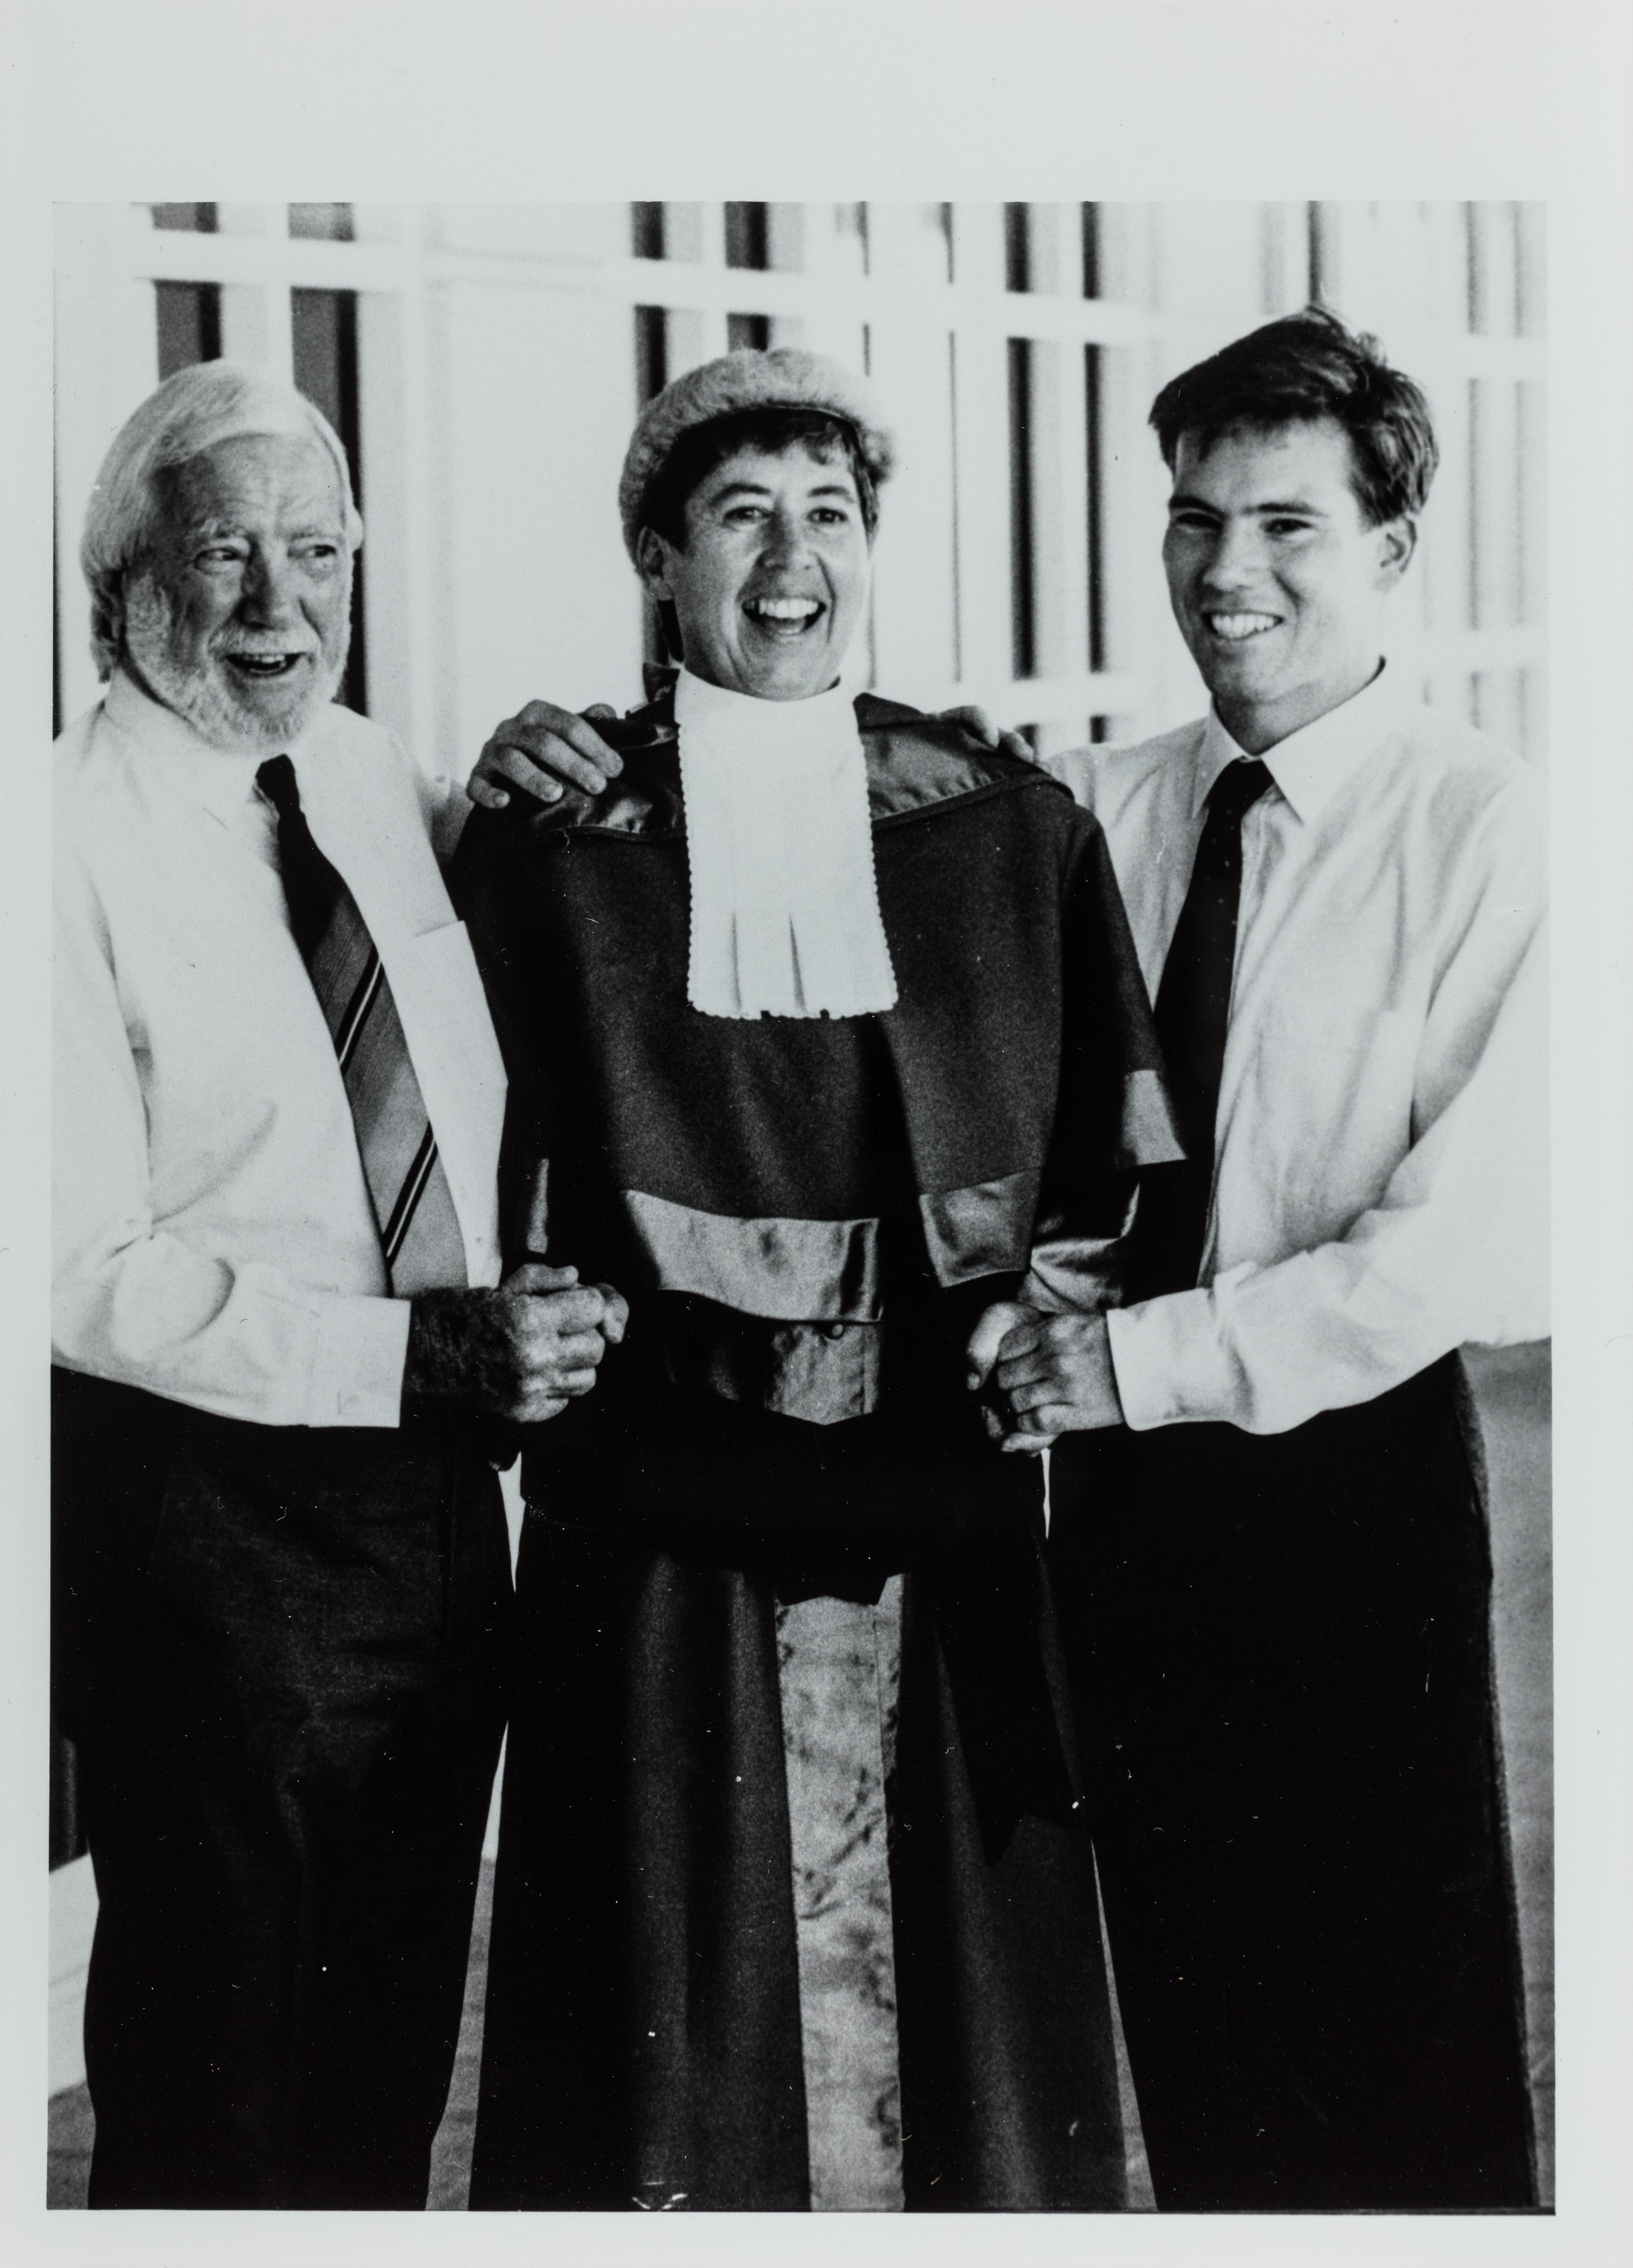 A black and white photo of a woman wearing a judge's robe and wig standing between two men